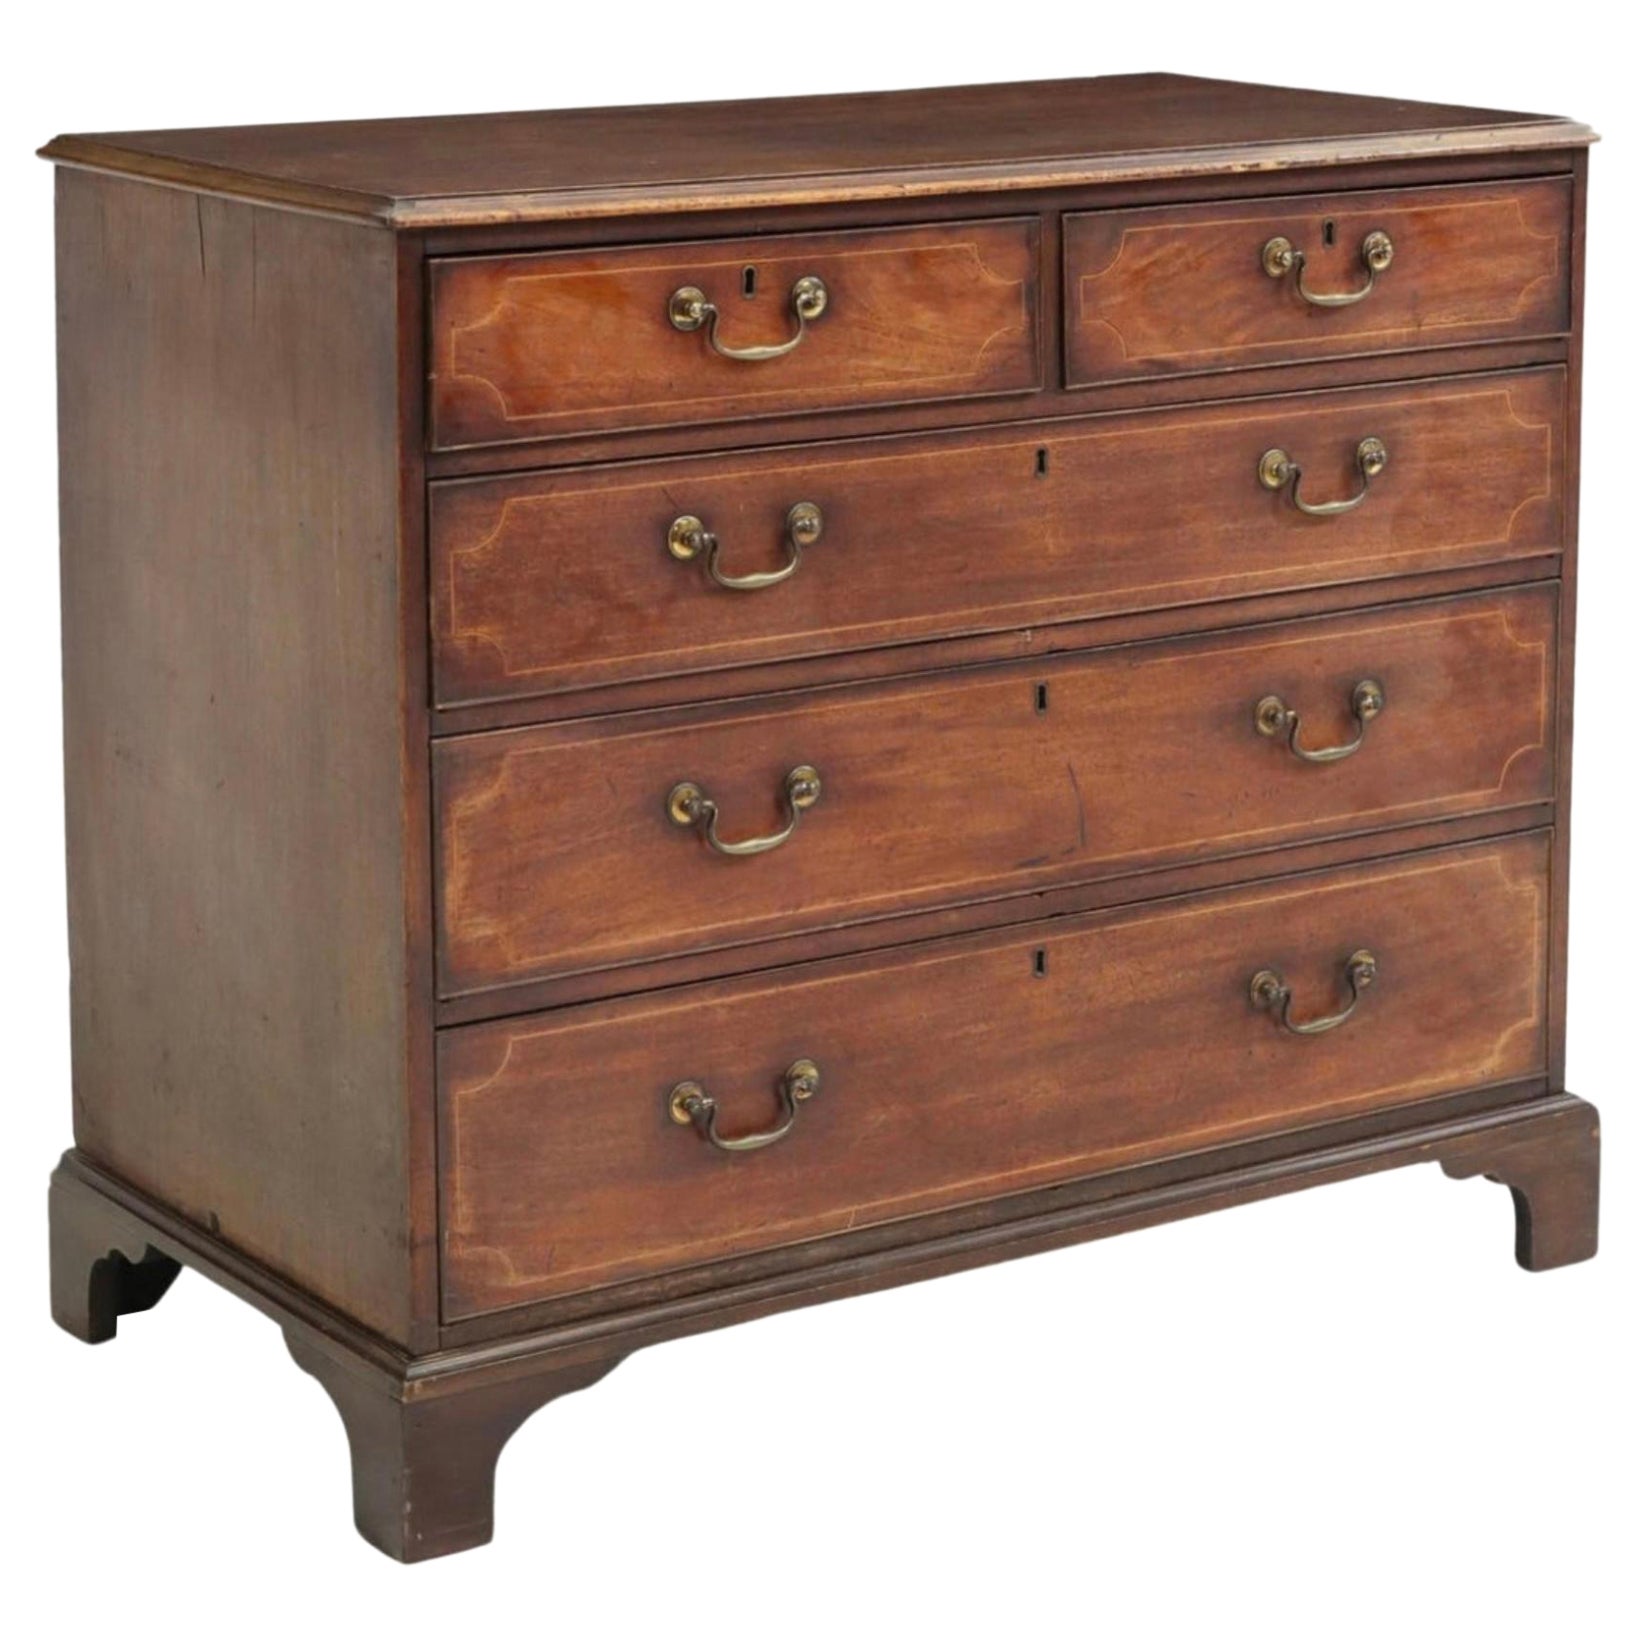 English 18th C. Georgian Period Inlaid Mahogany Chest of Drawers For Sale